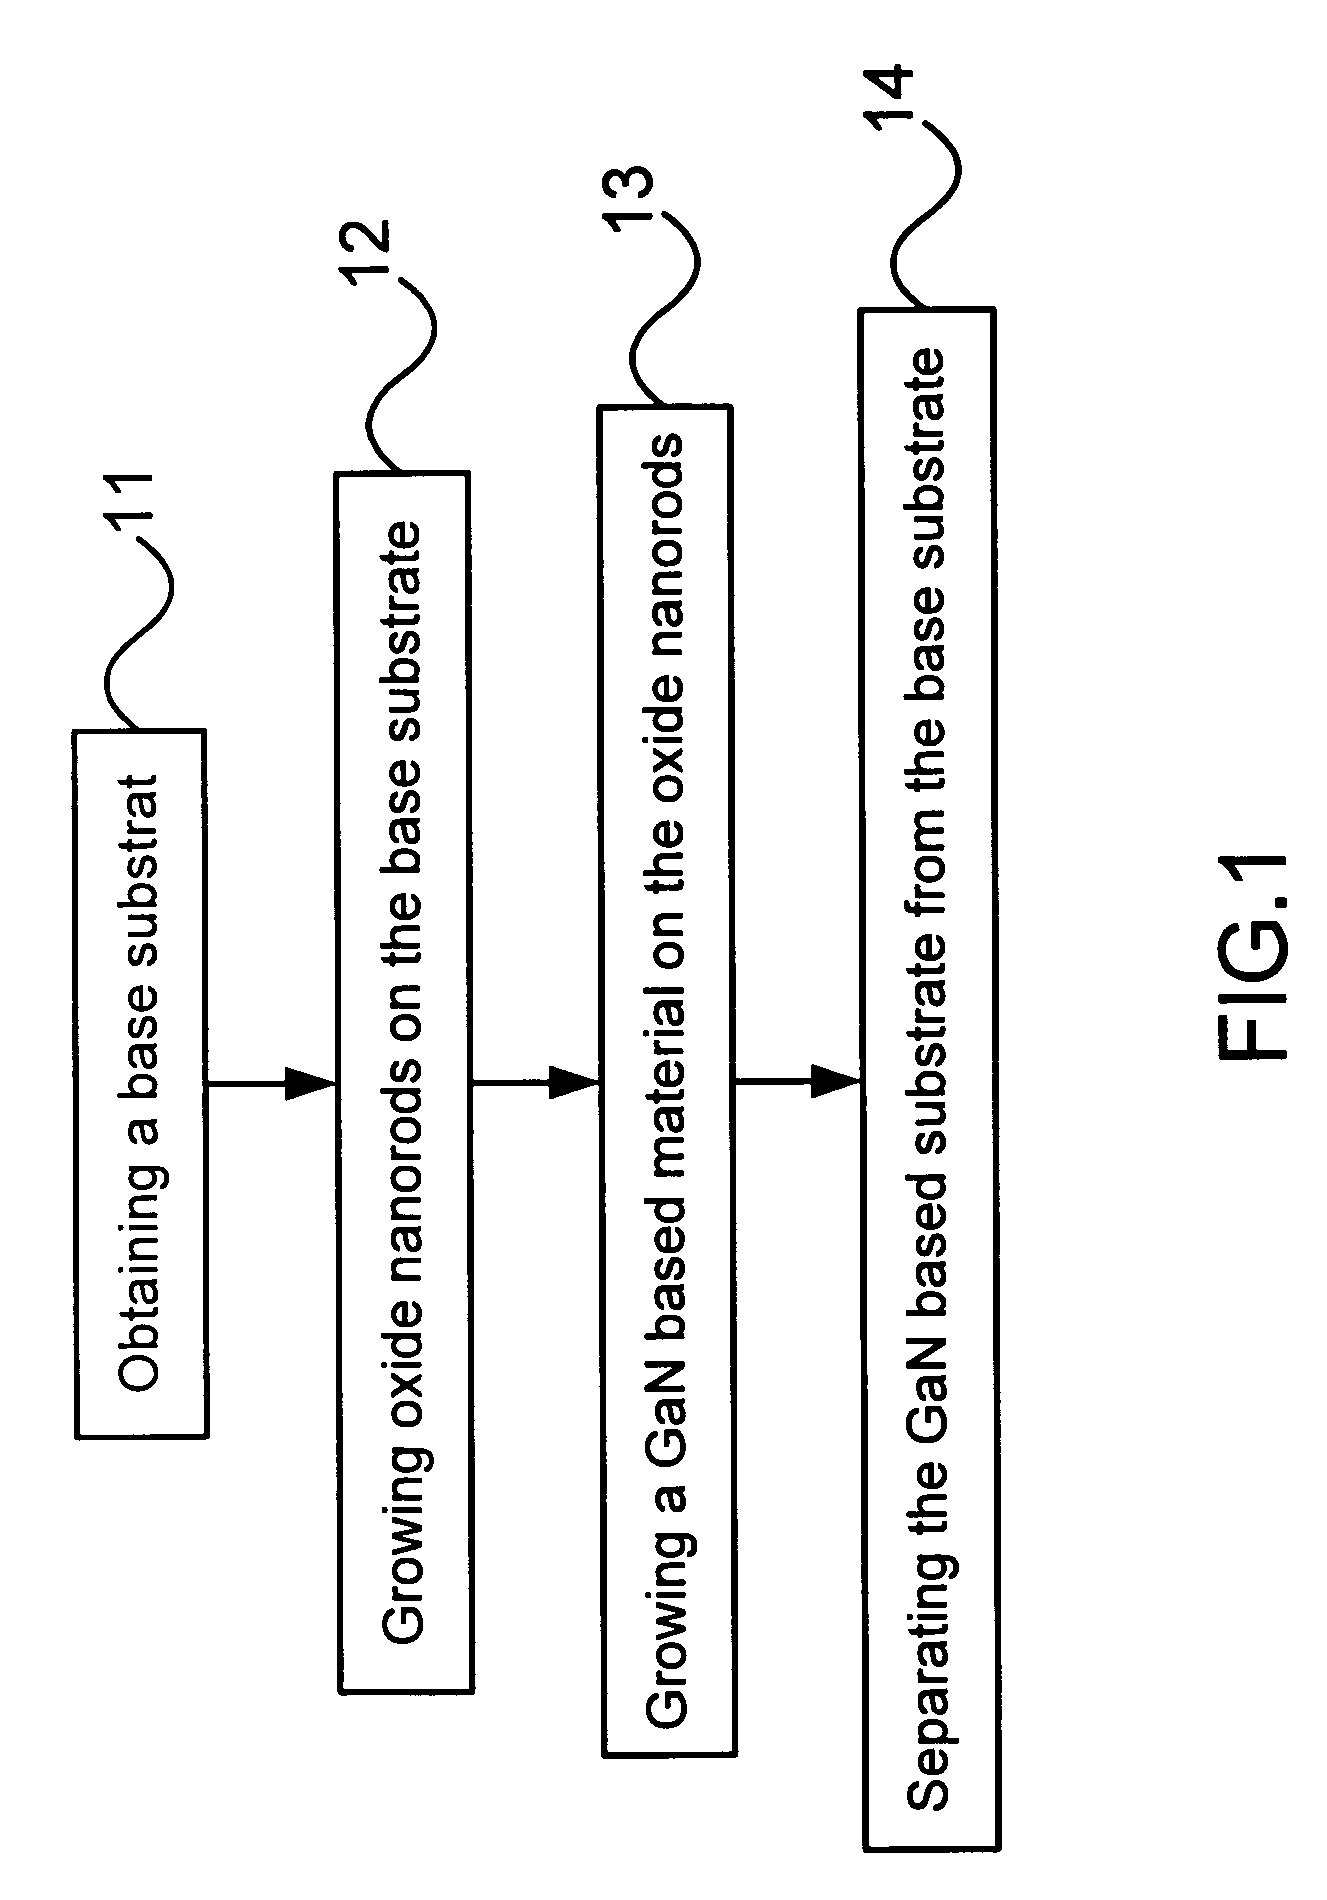 Method for fabricating single-crystal GaN based substrate